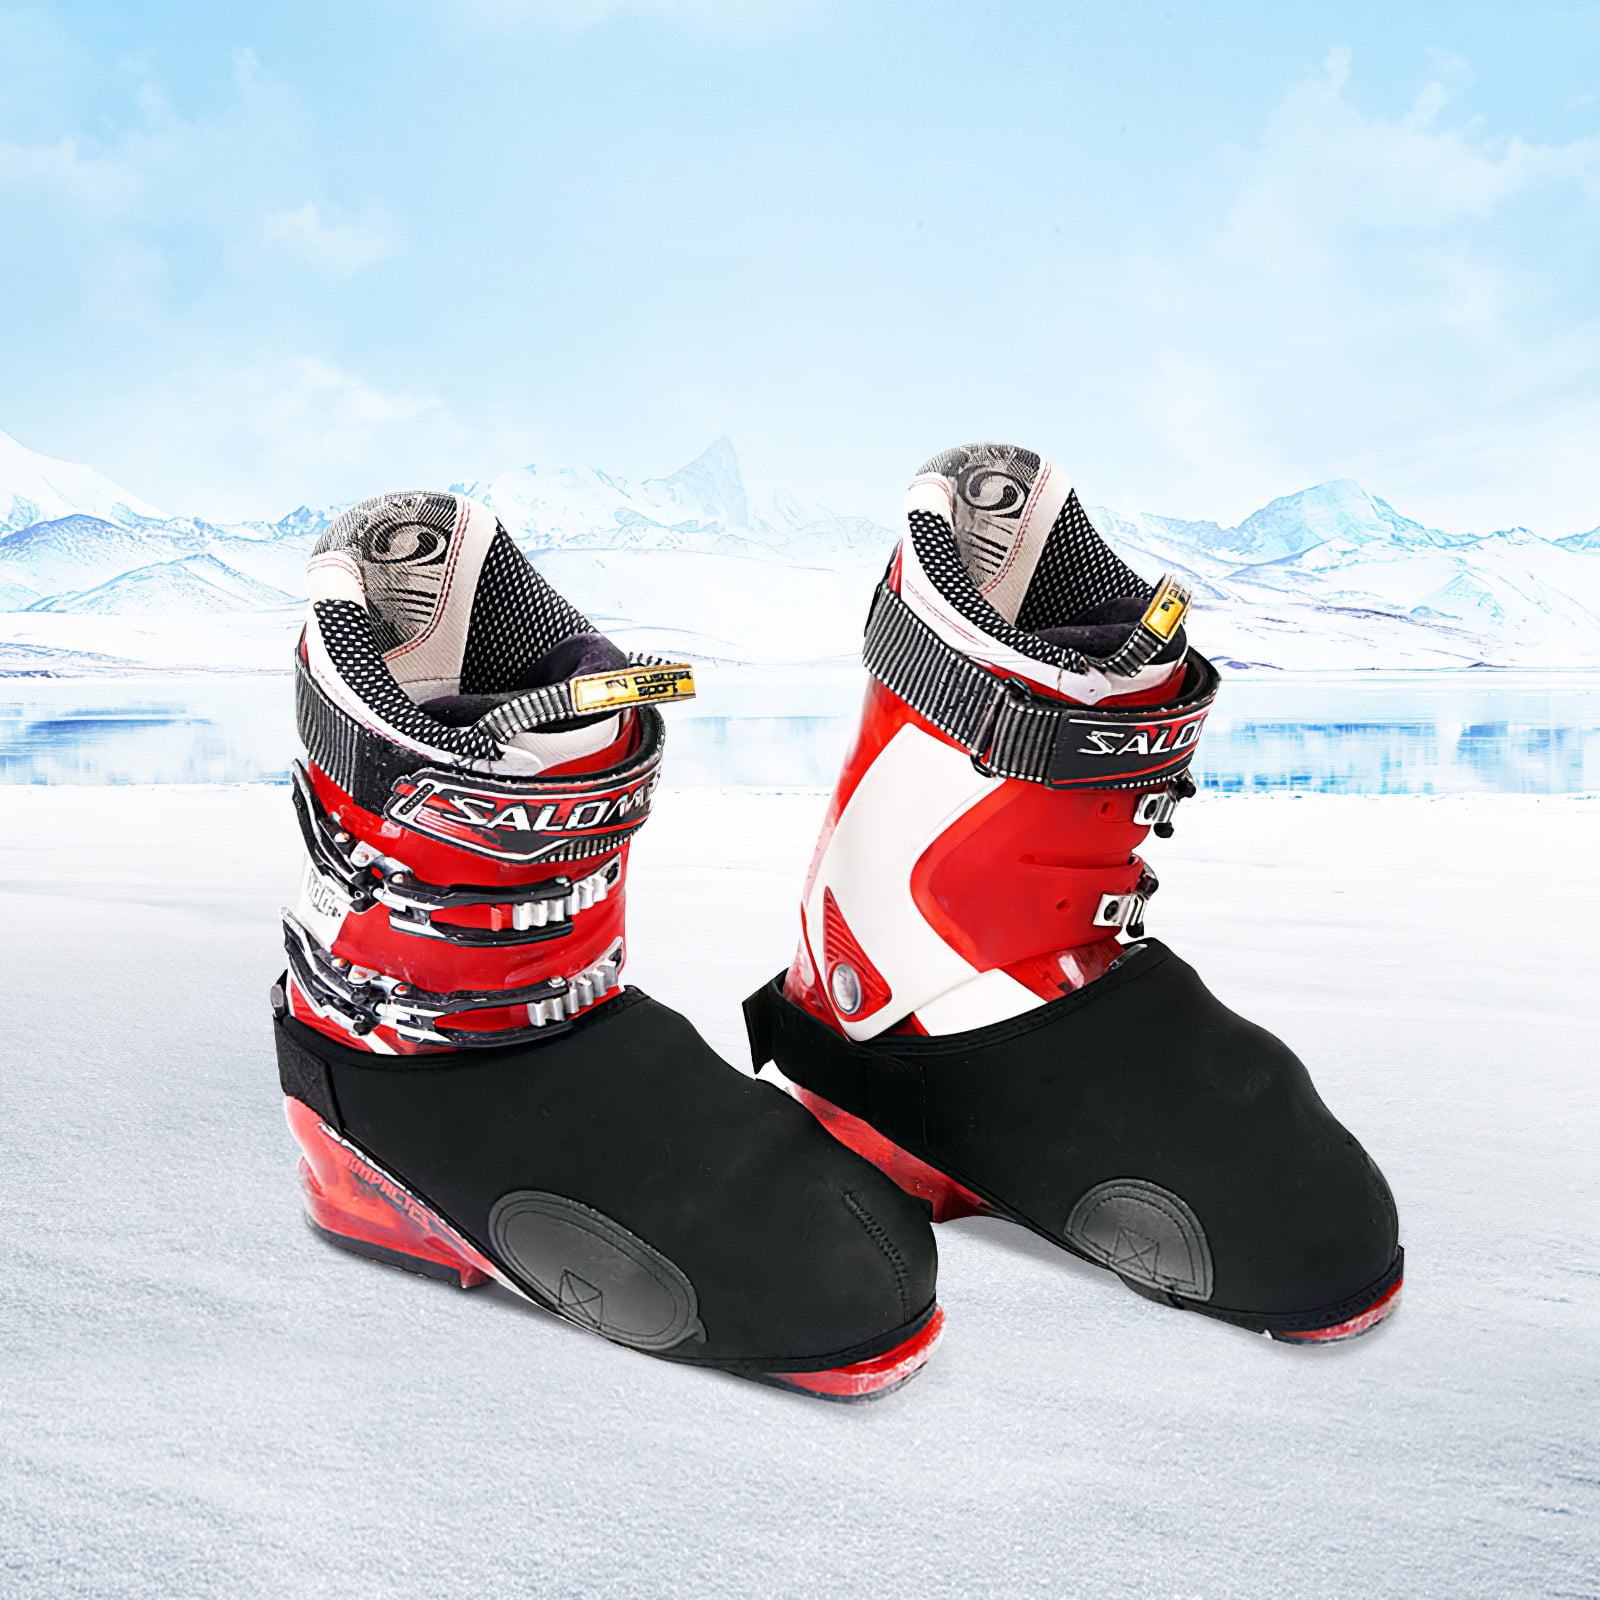 2pcs Cold-proof and Snow-proof Ski Boots Shoes Cover One Size Fits All 